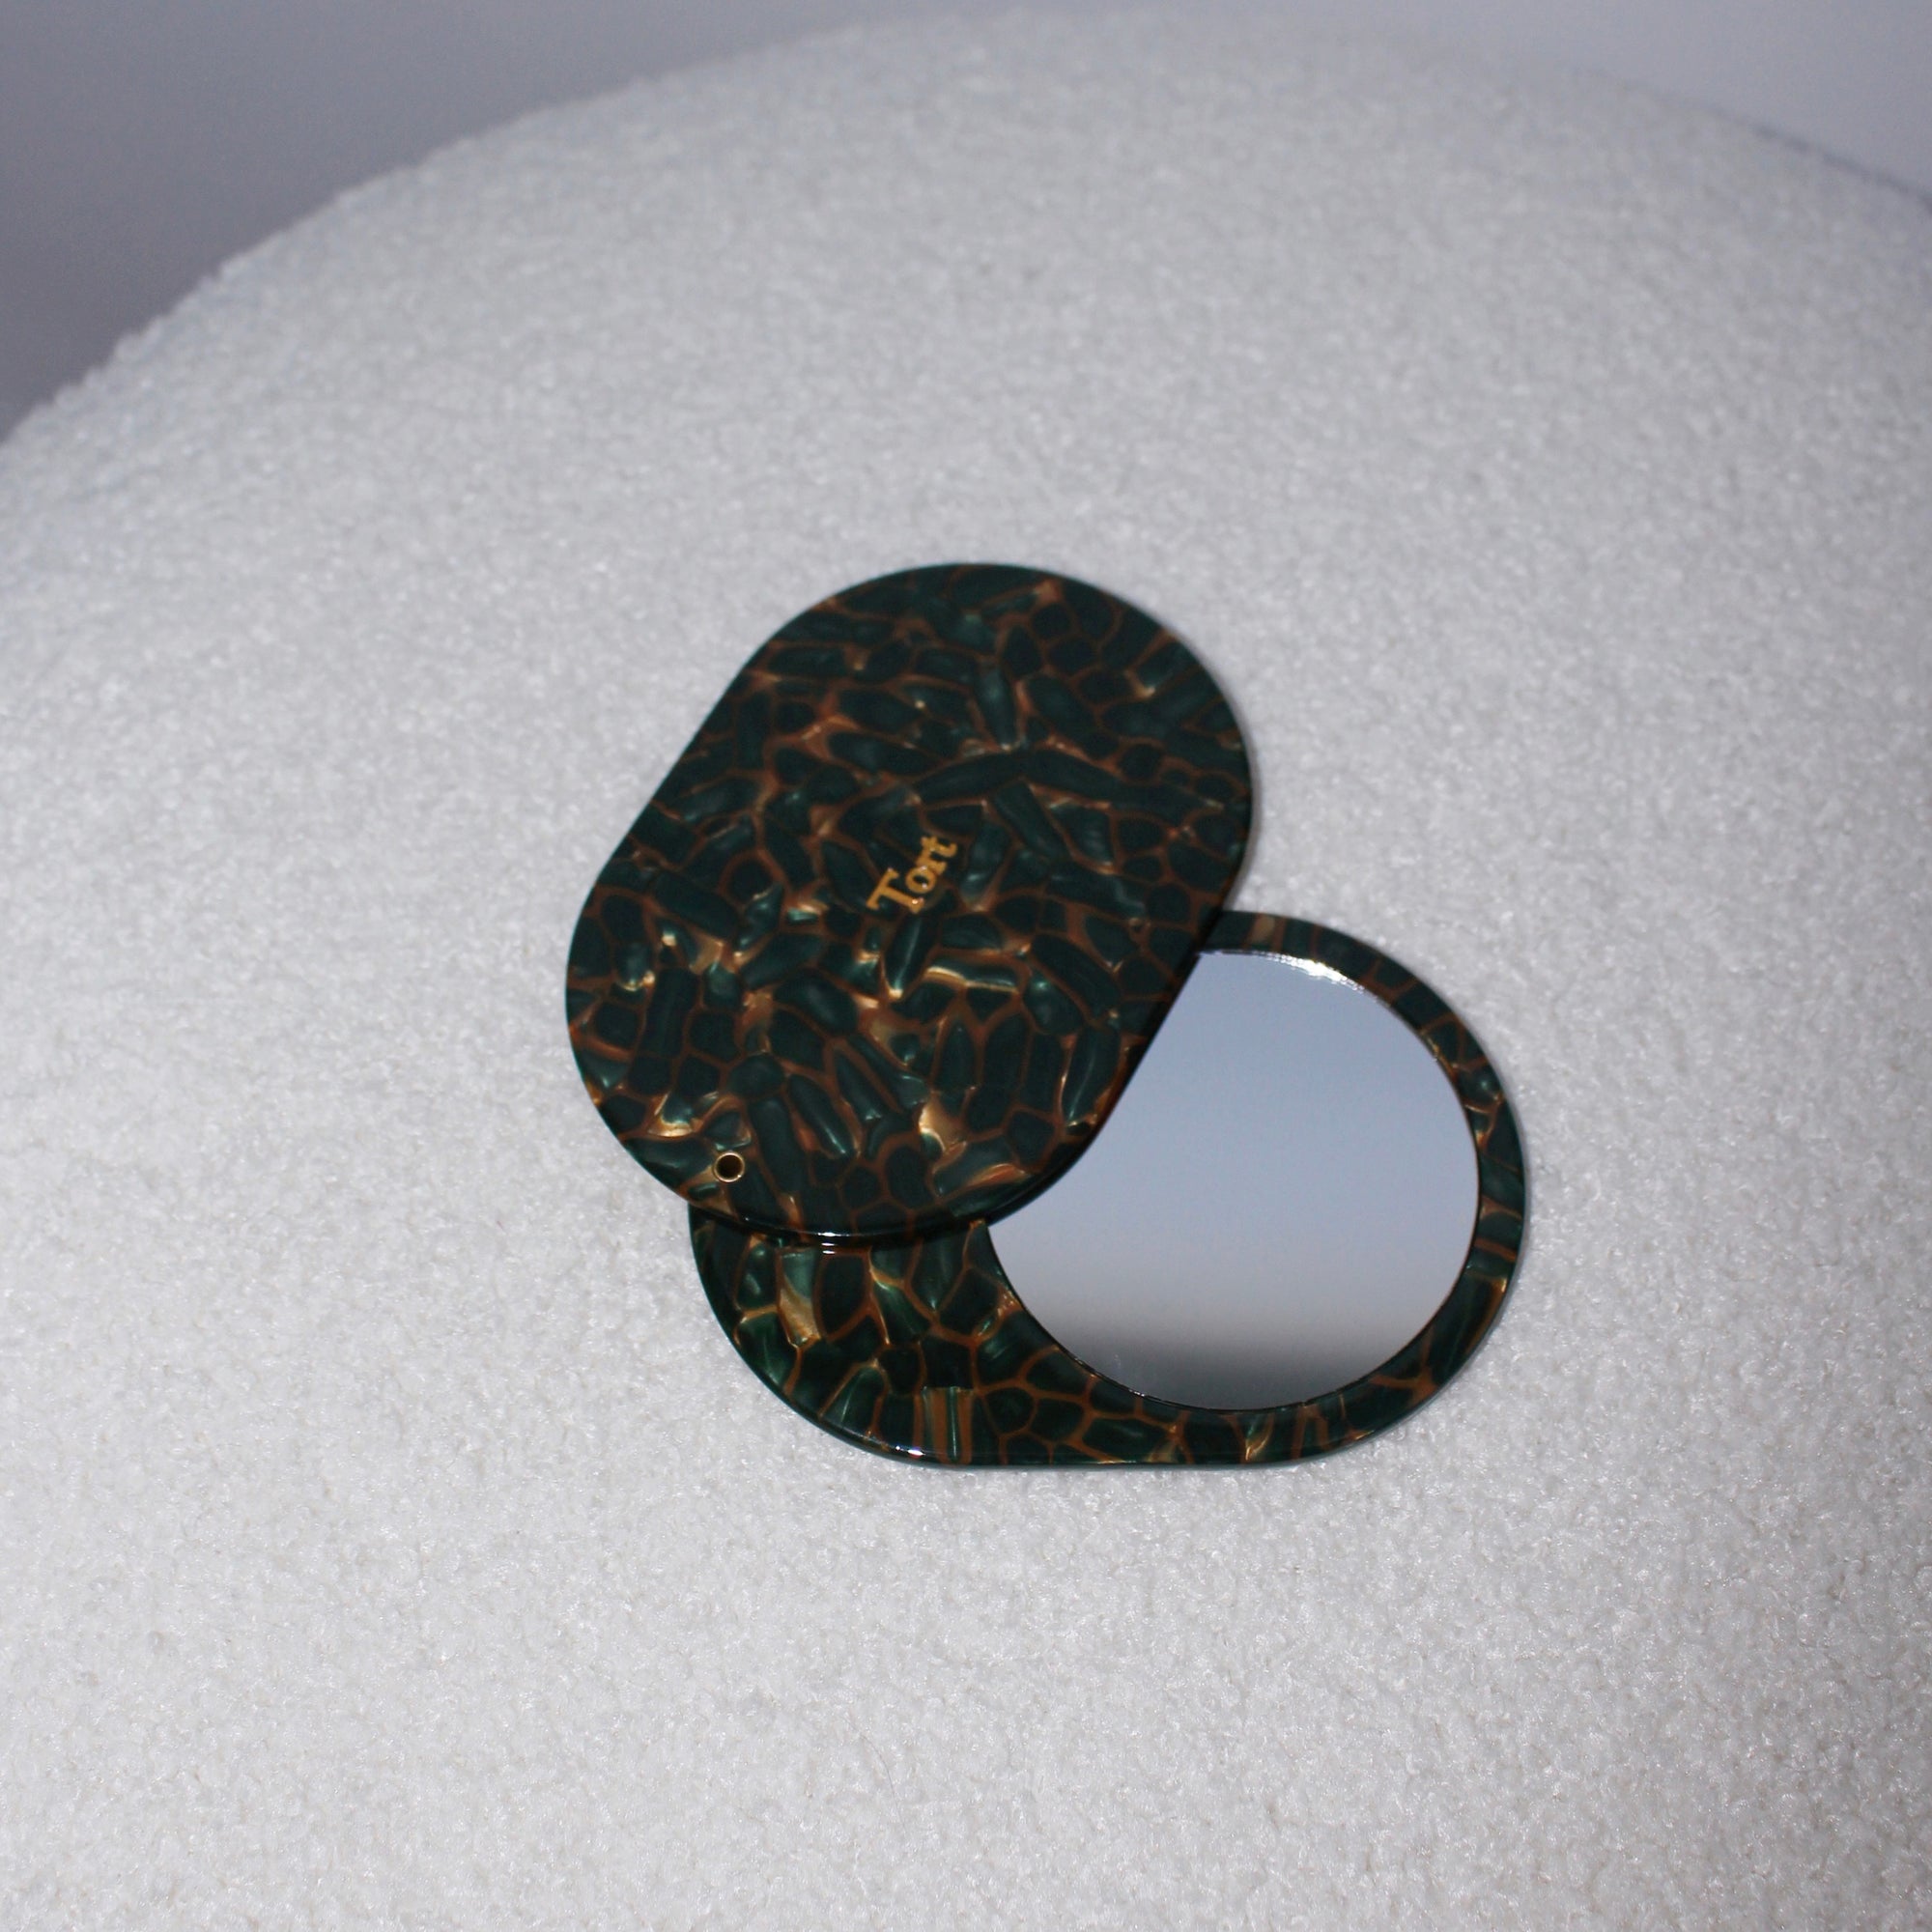 Meet JAYA!  A compact mirror is a handbag essential. Made from smooth, hand-poured eco-resin, the JAYA mirror is super cute with added protection and cleanliness through a sliding mechanism.  Each mirror comes in a branded Tort pouch (colours change seasonally).  Size: 10.5cm  Colour: ivy green and bronze mosaic effect  Material: eco-resin